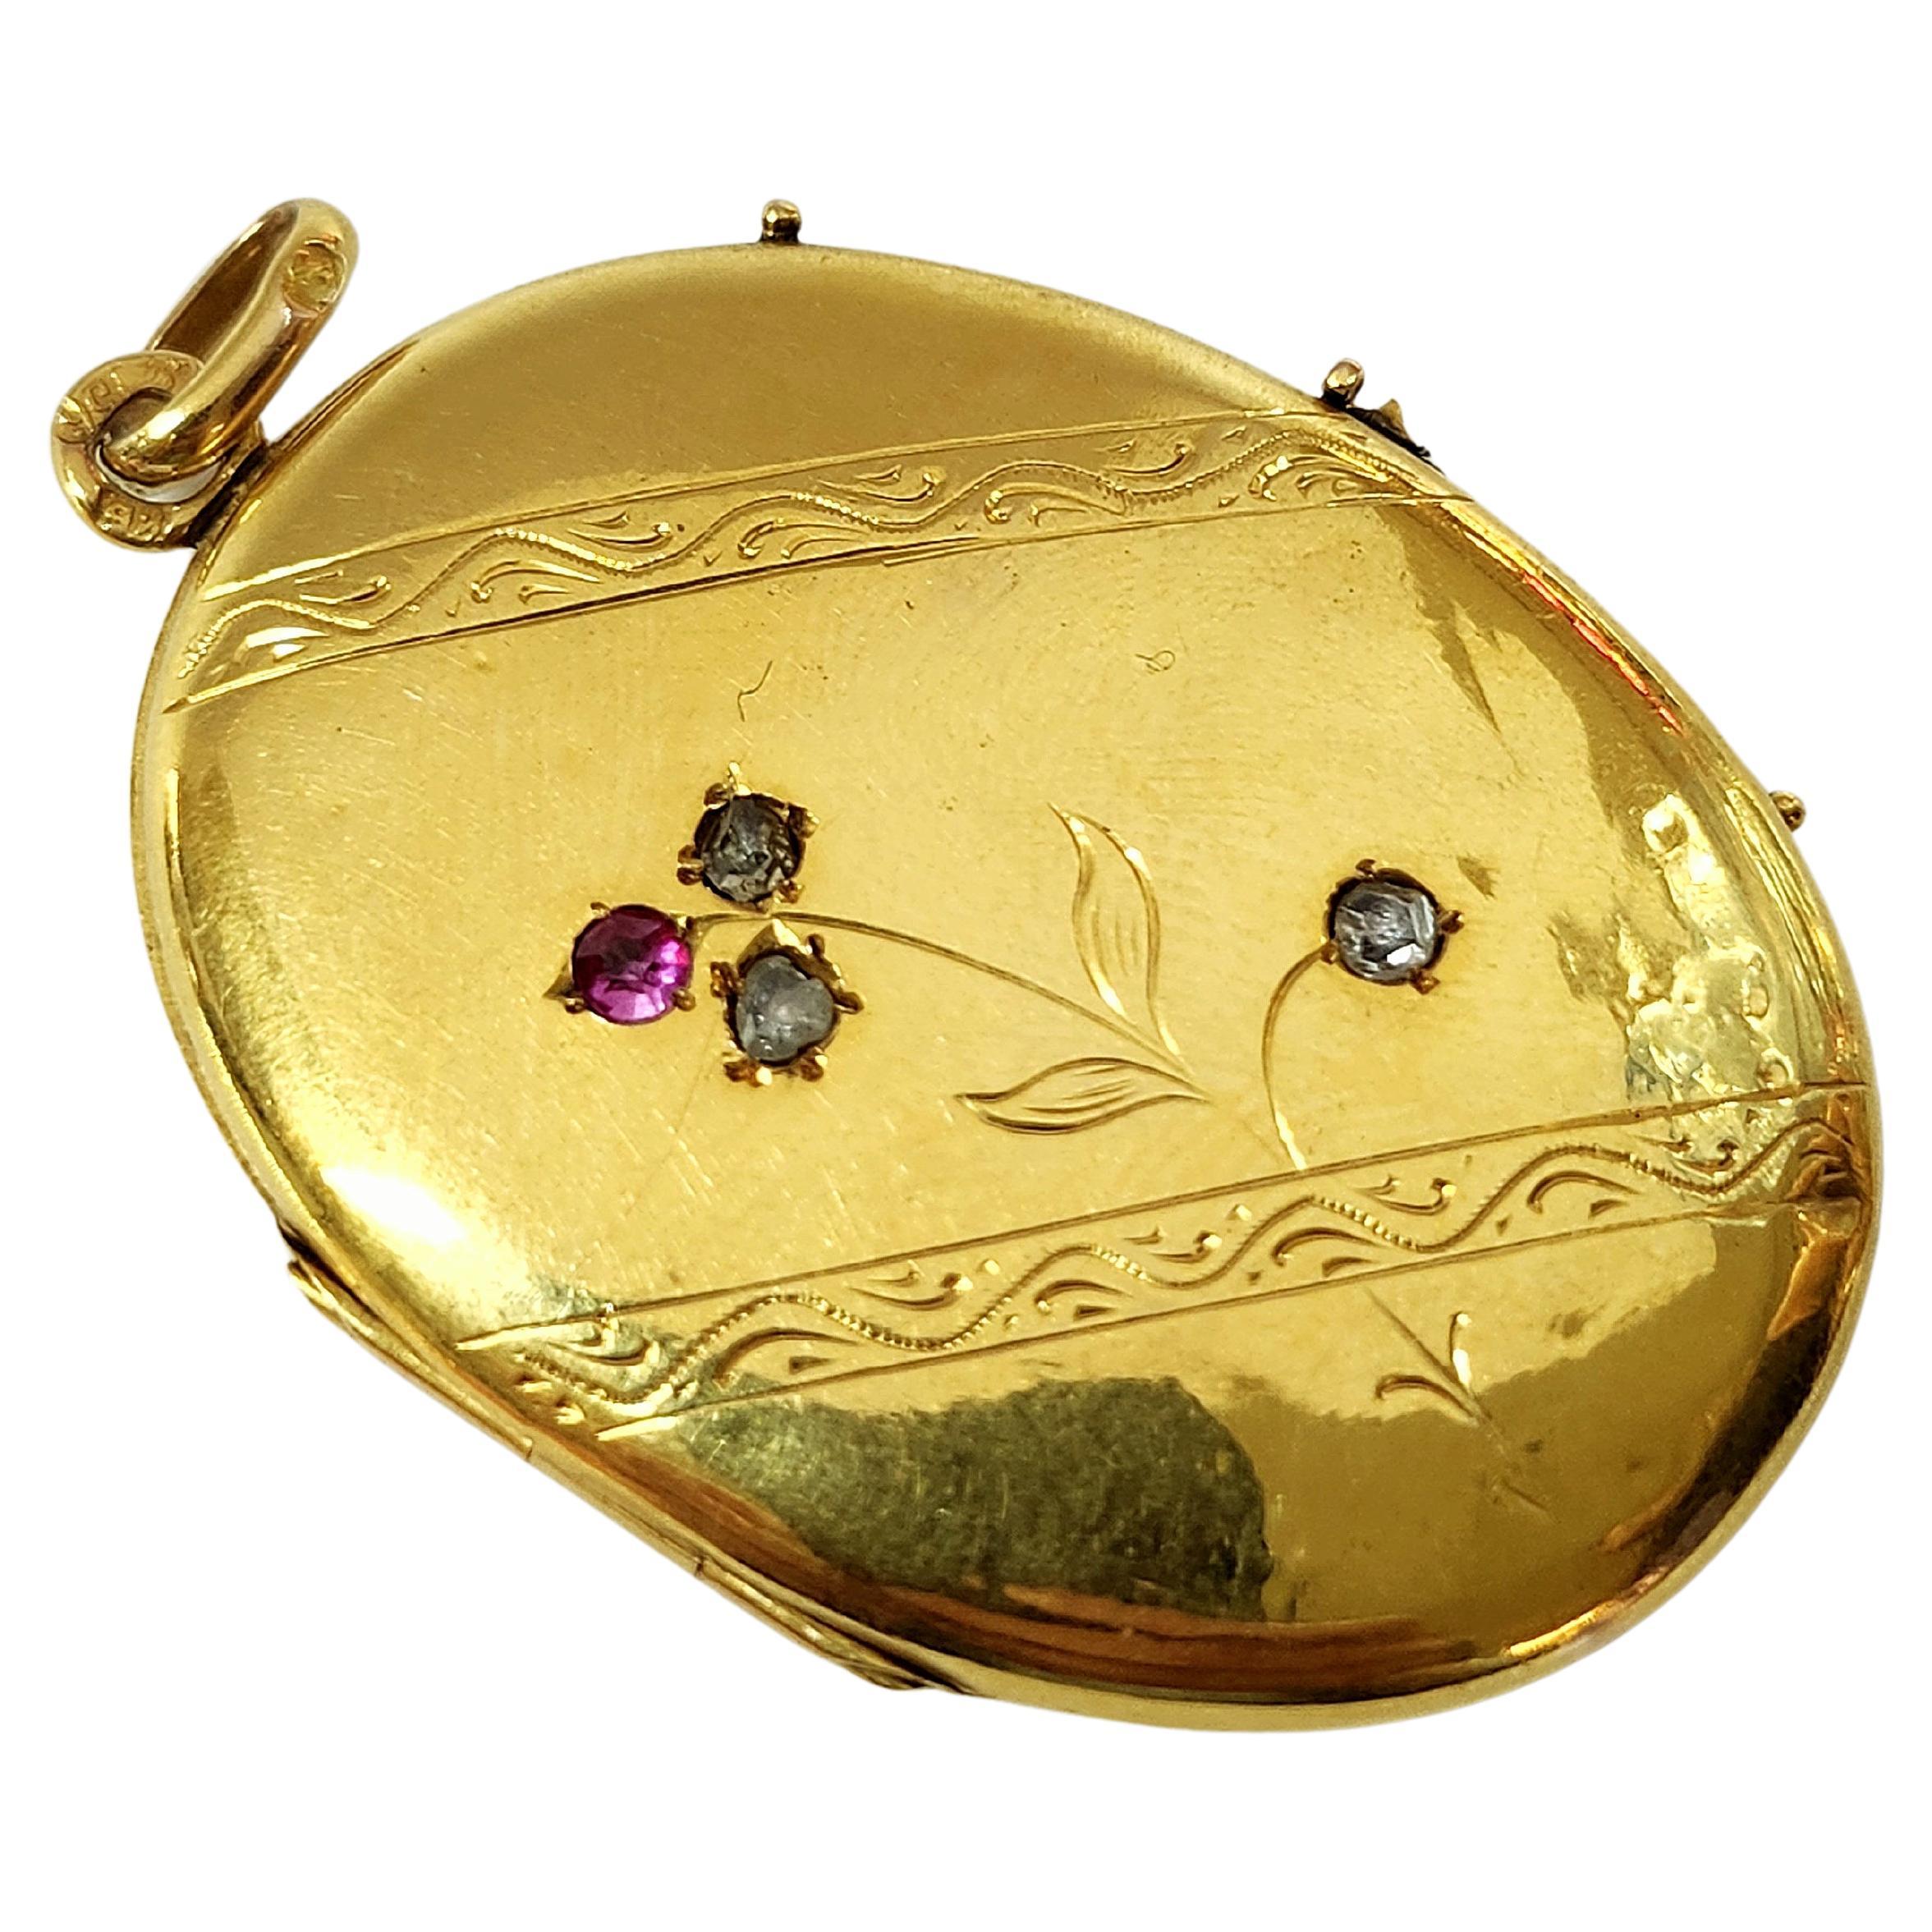 Antique 14k gold russian large locket pendant engraved detailed work centered with rose cut diaminds and ruby pendant was made in odessa during the imperial russian era 1880.c hall marked 56 imperial russian gold standard and odessa assay mark and